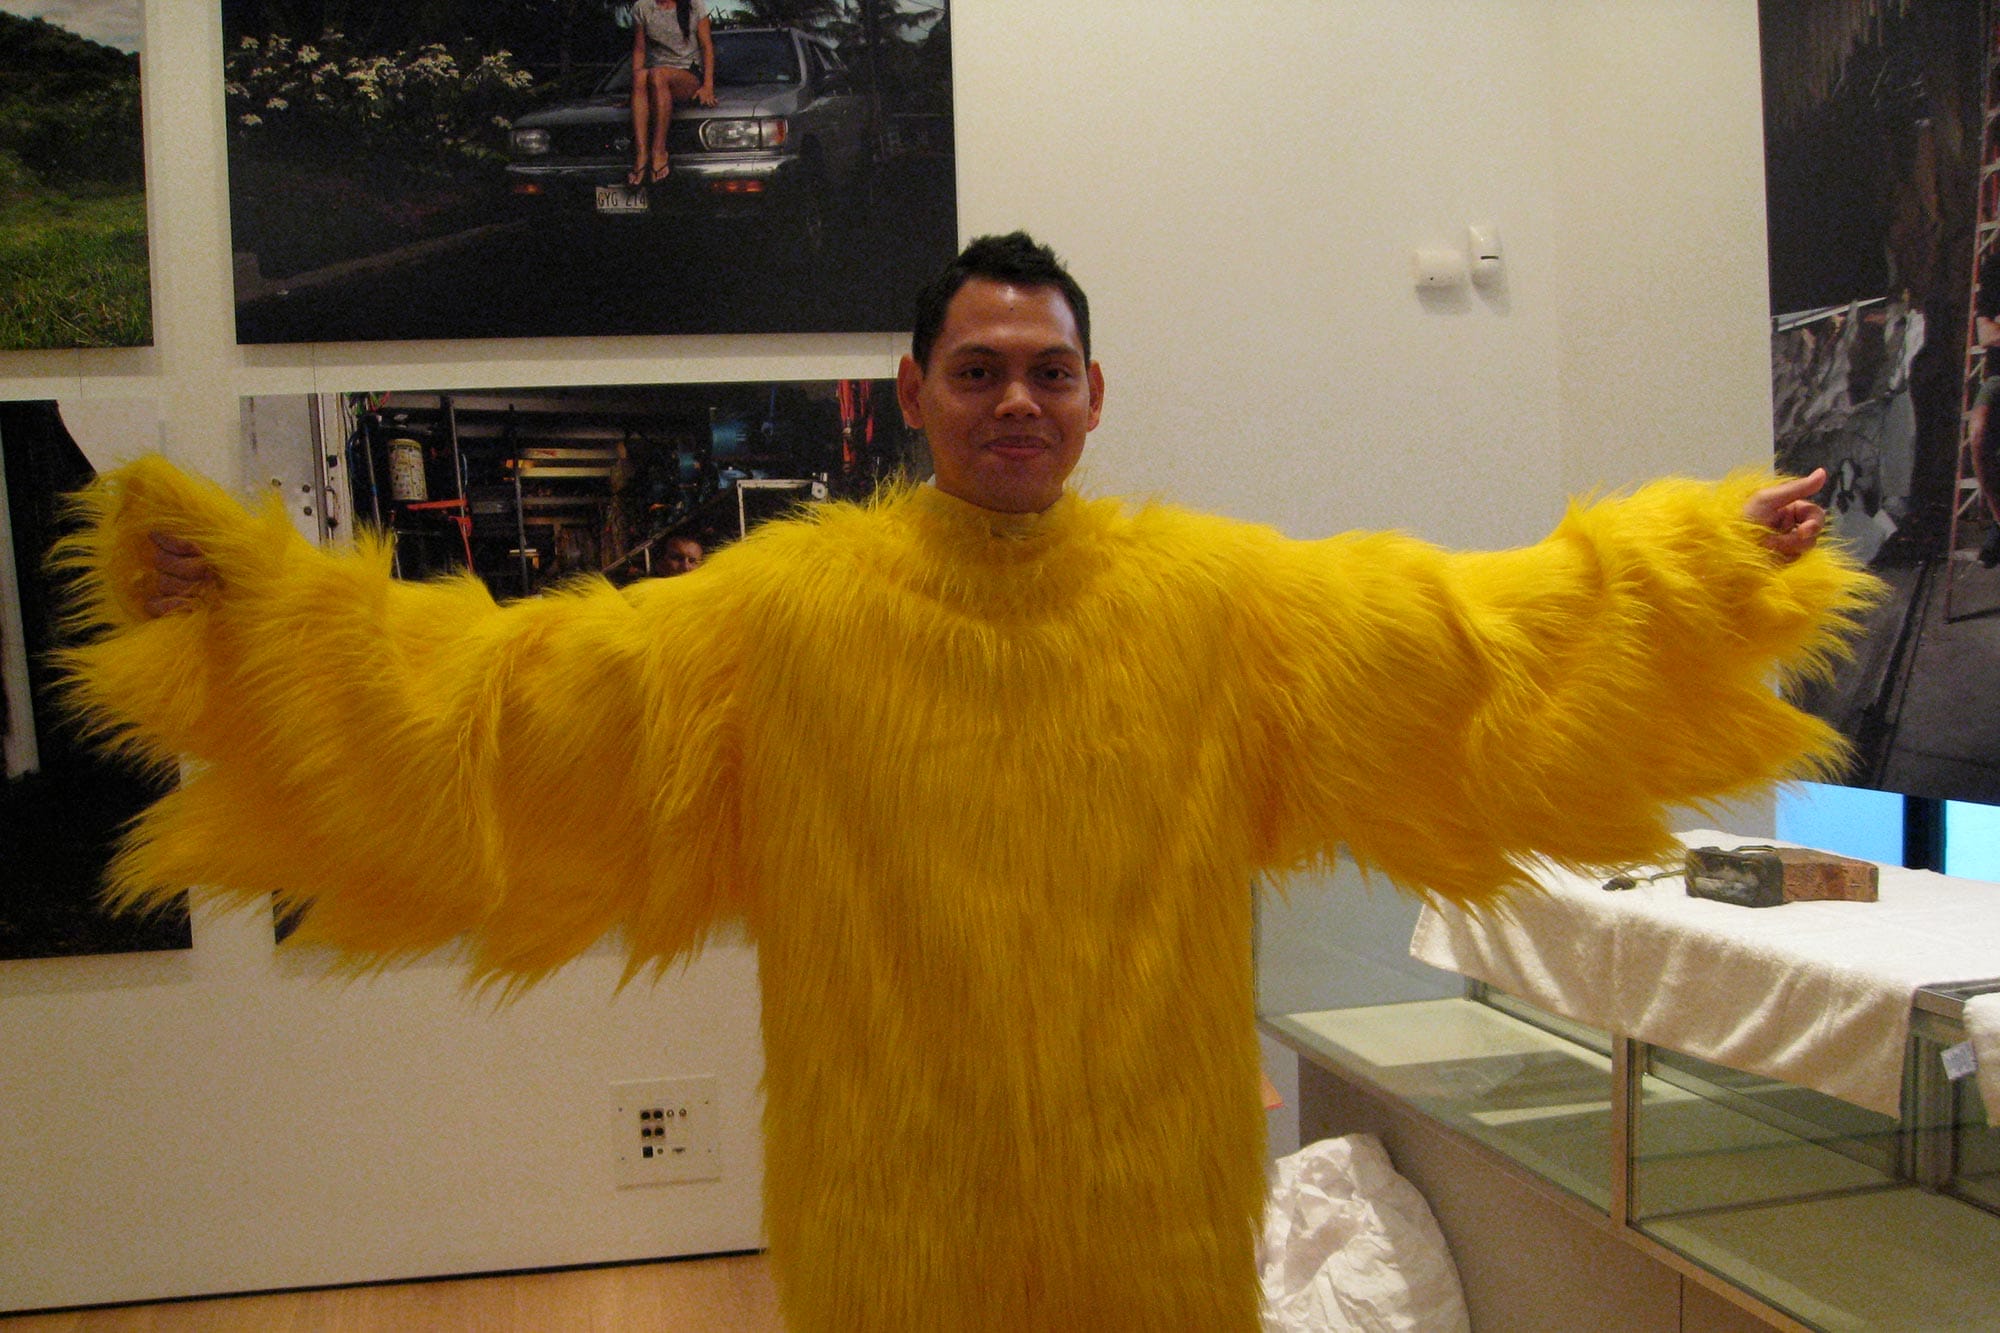 Ronnie Mewngkang wearing a chicken costume from the hit TV show LOST.